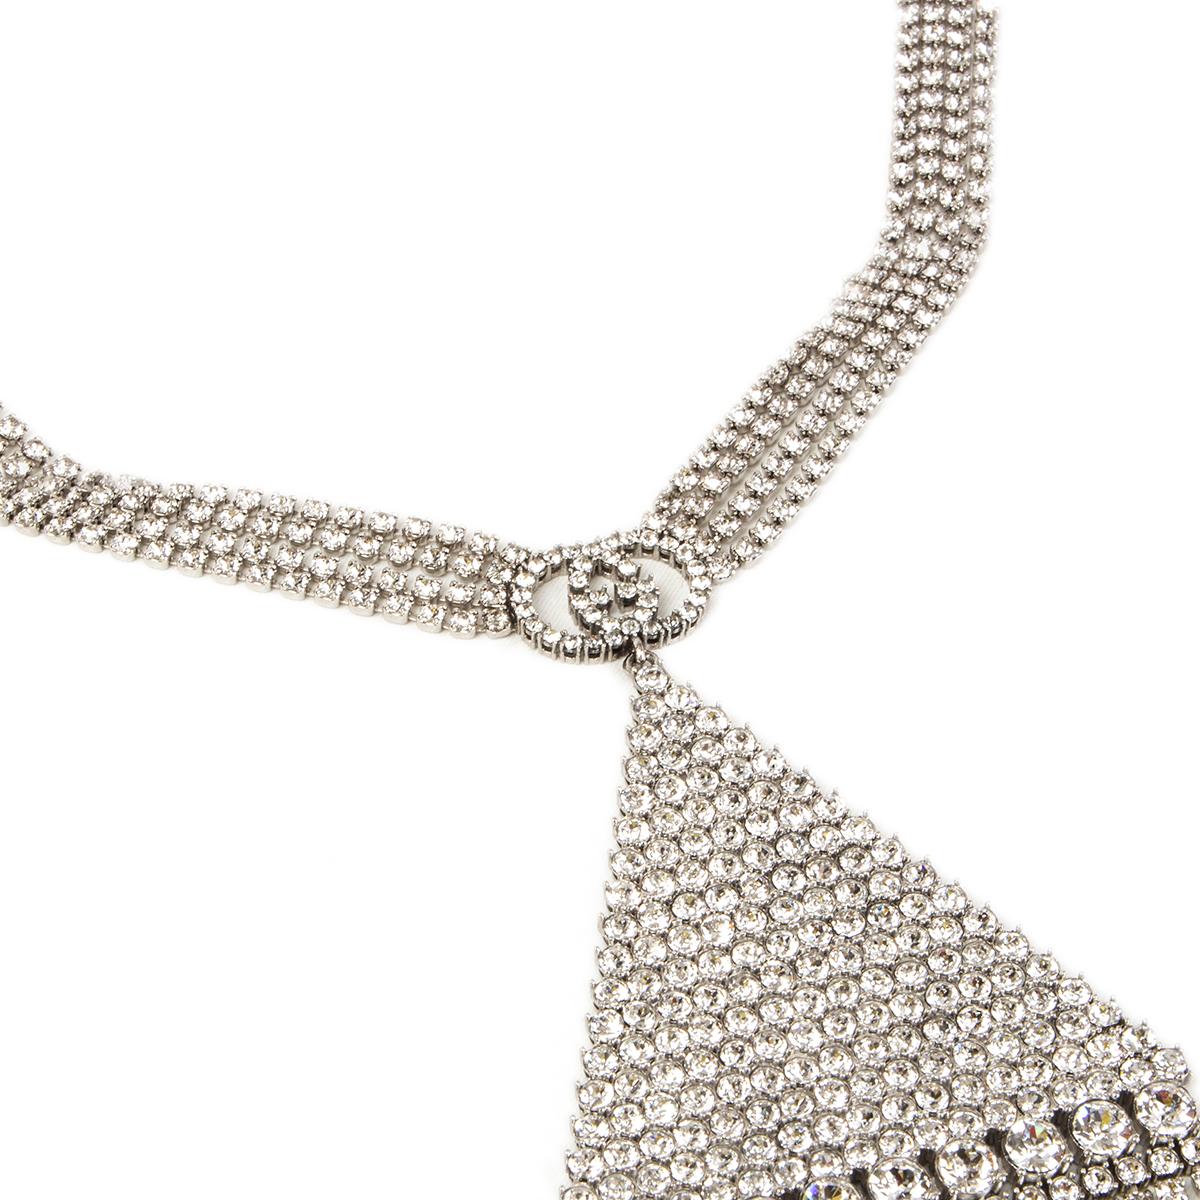 Gucci necklace embellished with crystals to a metal base with a palladium finish. Formed by the initials of the House's founder Guccio Gucci, the classic Interlocking G logo is refashioned as a precious detail, while crystal fringes cascade down the